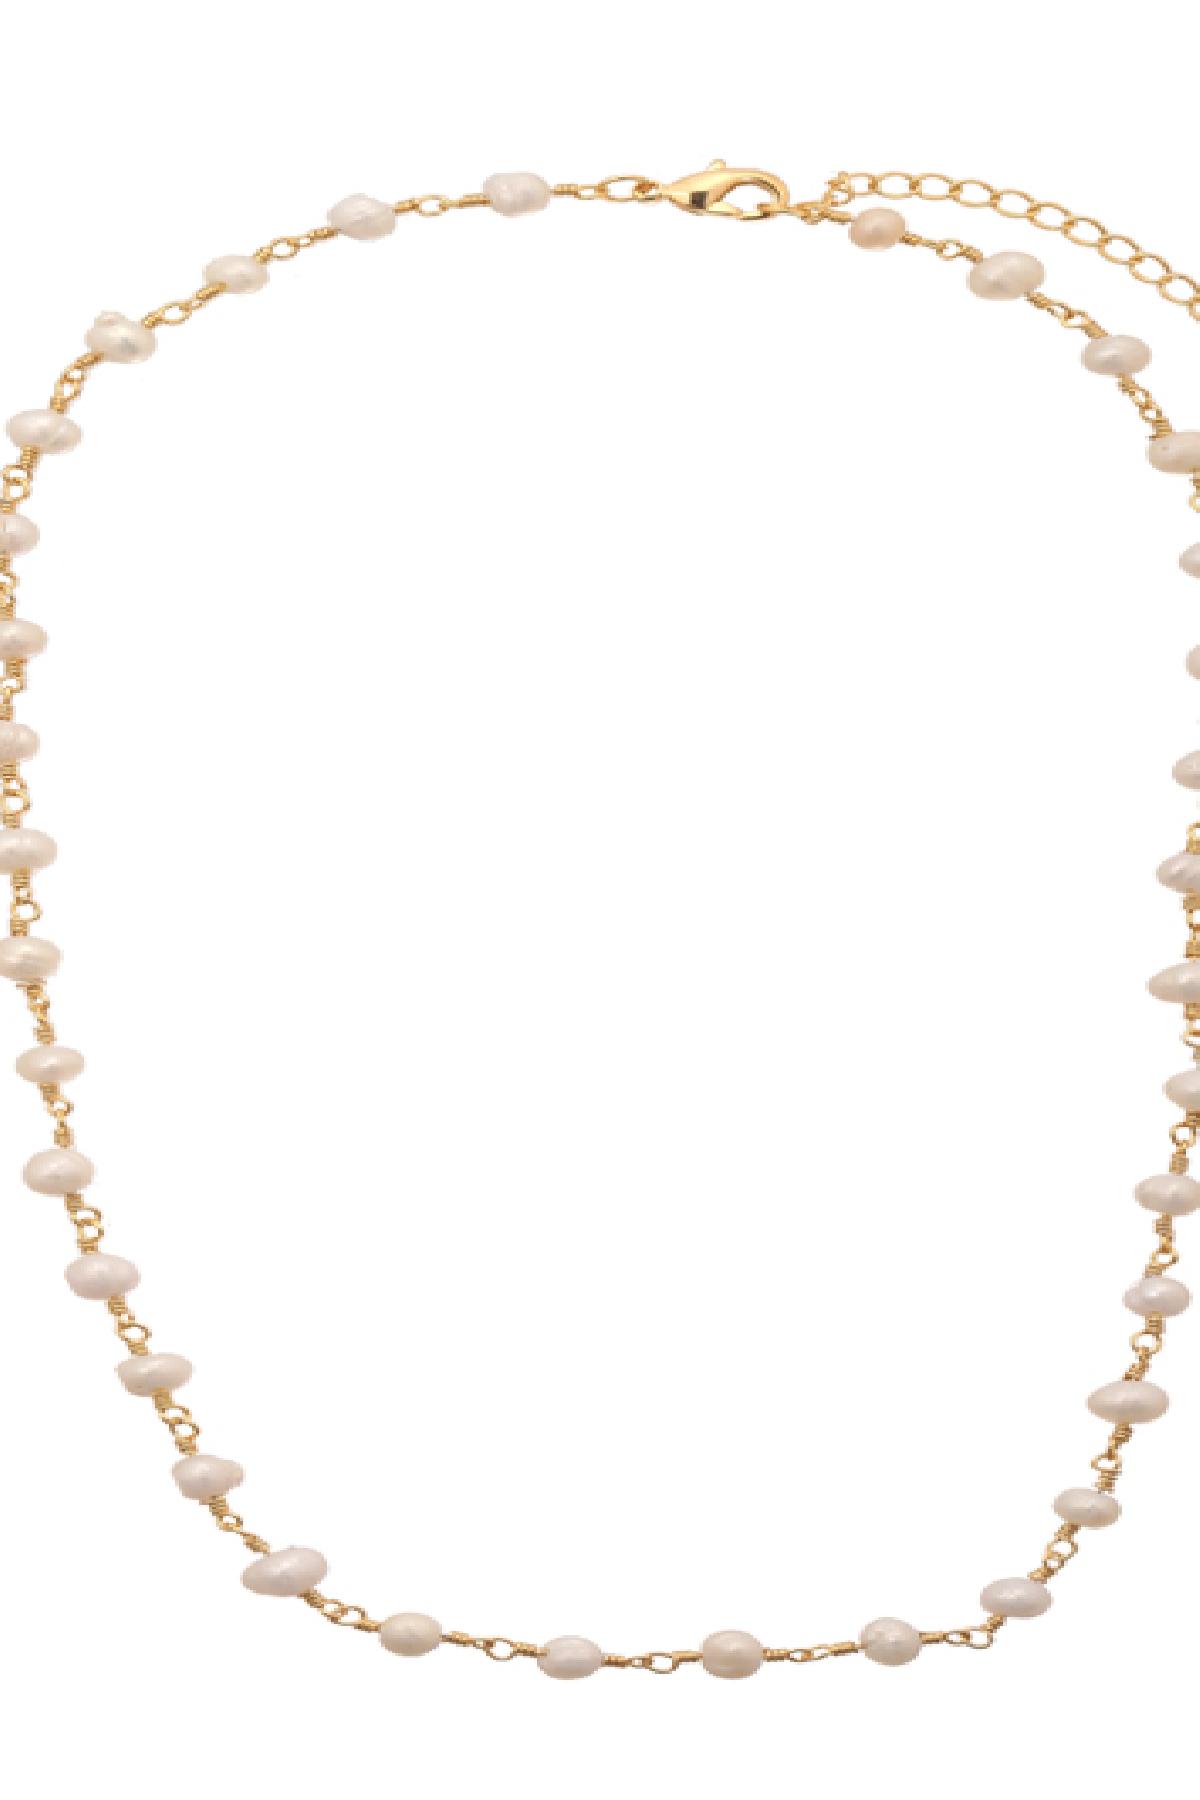 Necklace Chain of Pearls Gold Gold Plated h5 Picture5